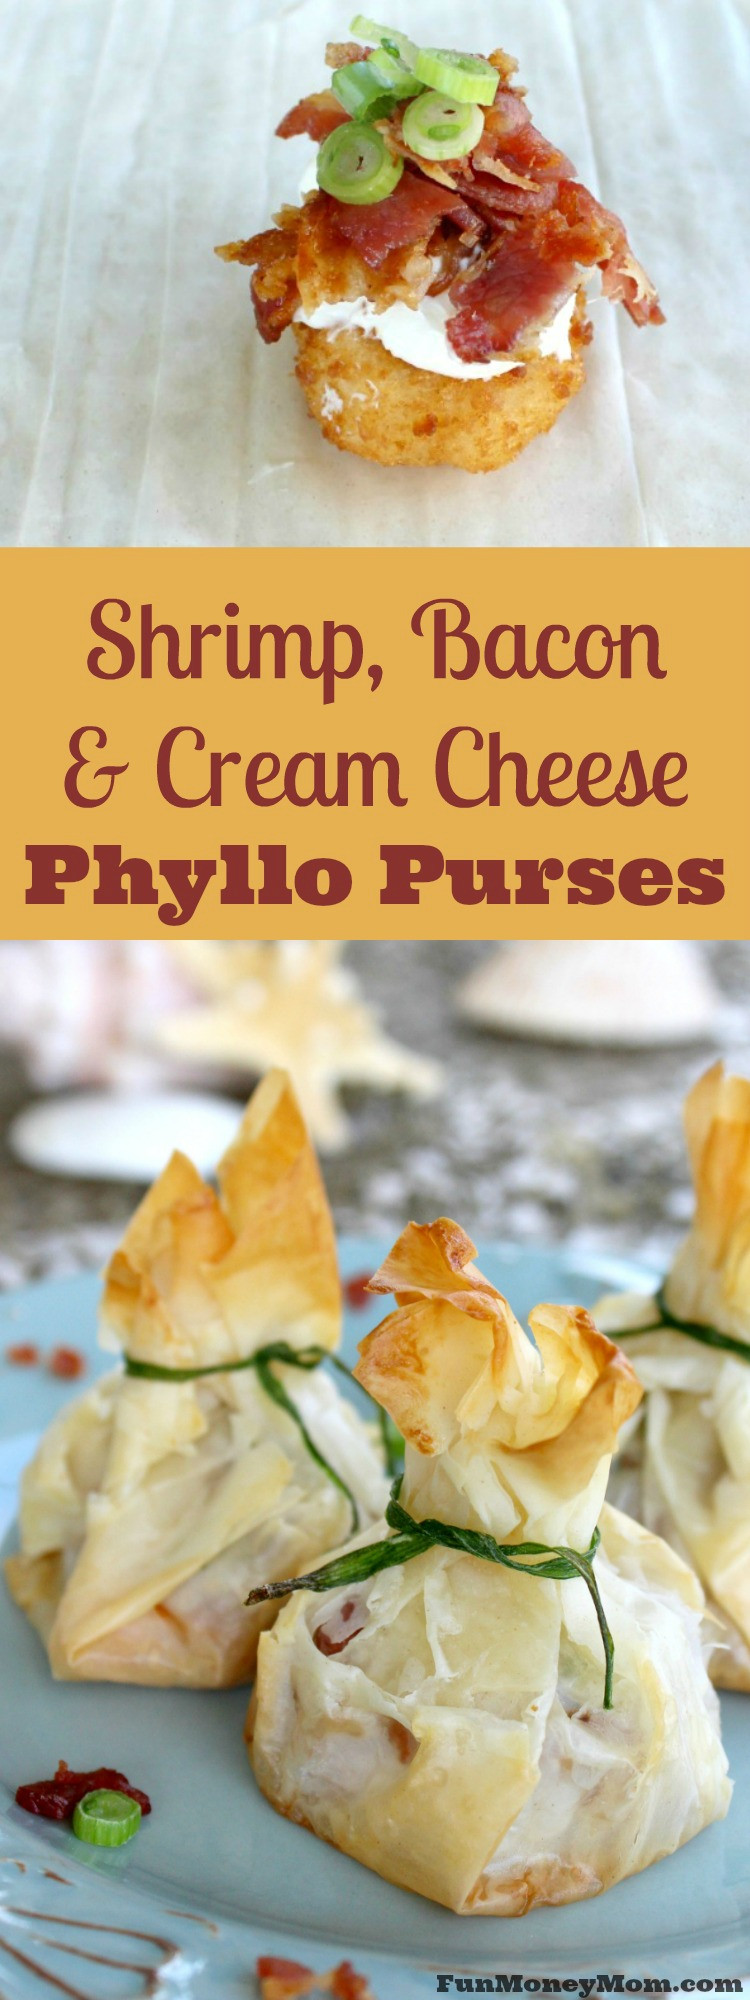 Cream Cheese Shrimp Appetizer
 Phyllo Wrapped Shrimp Appetizer With Bacon & Cream Cheese